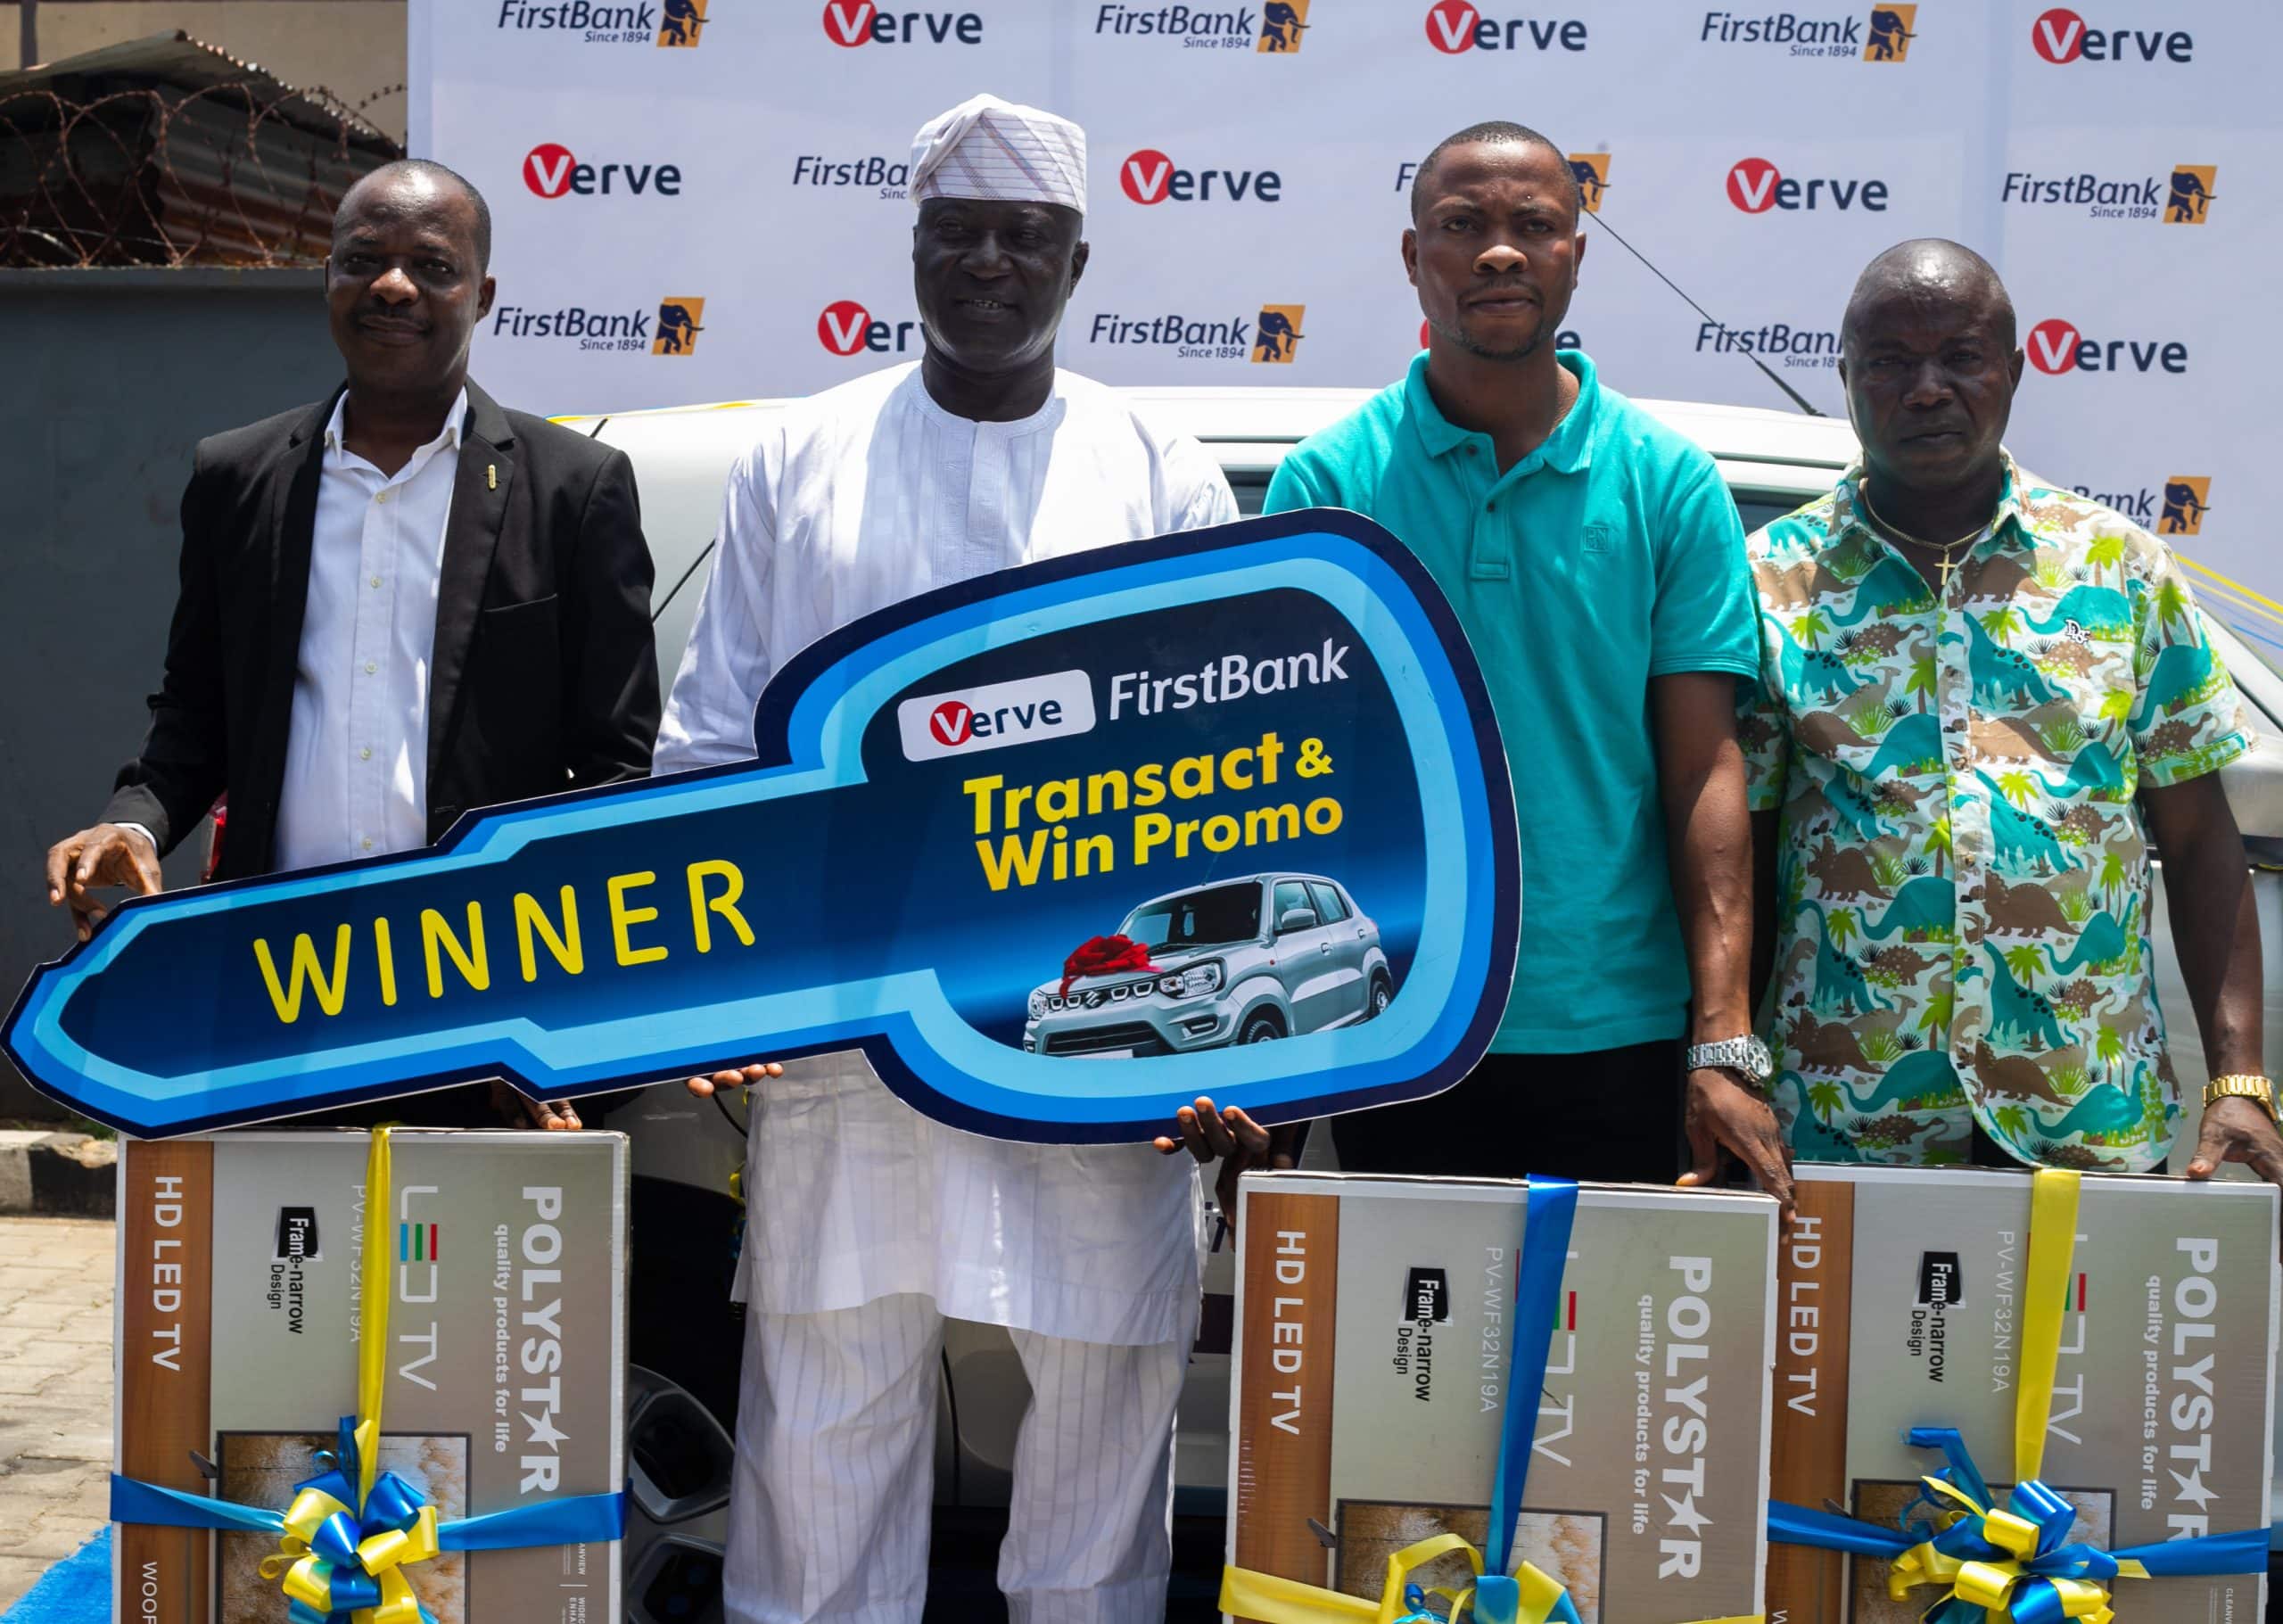 L-R Chuma Ezirim; Group Executive, eBusiness & Retail Products, FirstBank; Olakunle M. Animasahun, the grand prize winner; Vincent Ogbunude, Chief Executive Officer, Verve International and Folasade Femi - Lawal, Head, Cards and Messaging Business, FirstBank, following the presentation of the brand new car to Mr. Animasahun, at the recently concluded FirstBank Verve Card Transact and Win Promo. The prize presentation was held yesterday at the FirstBank headquarters.